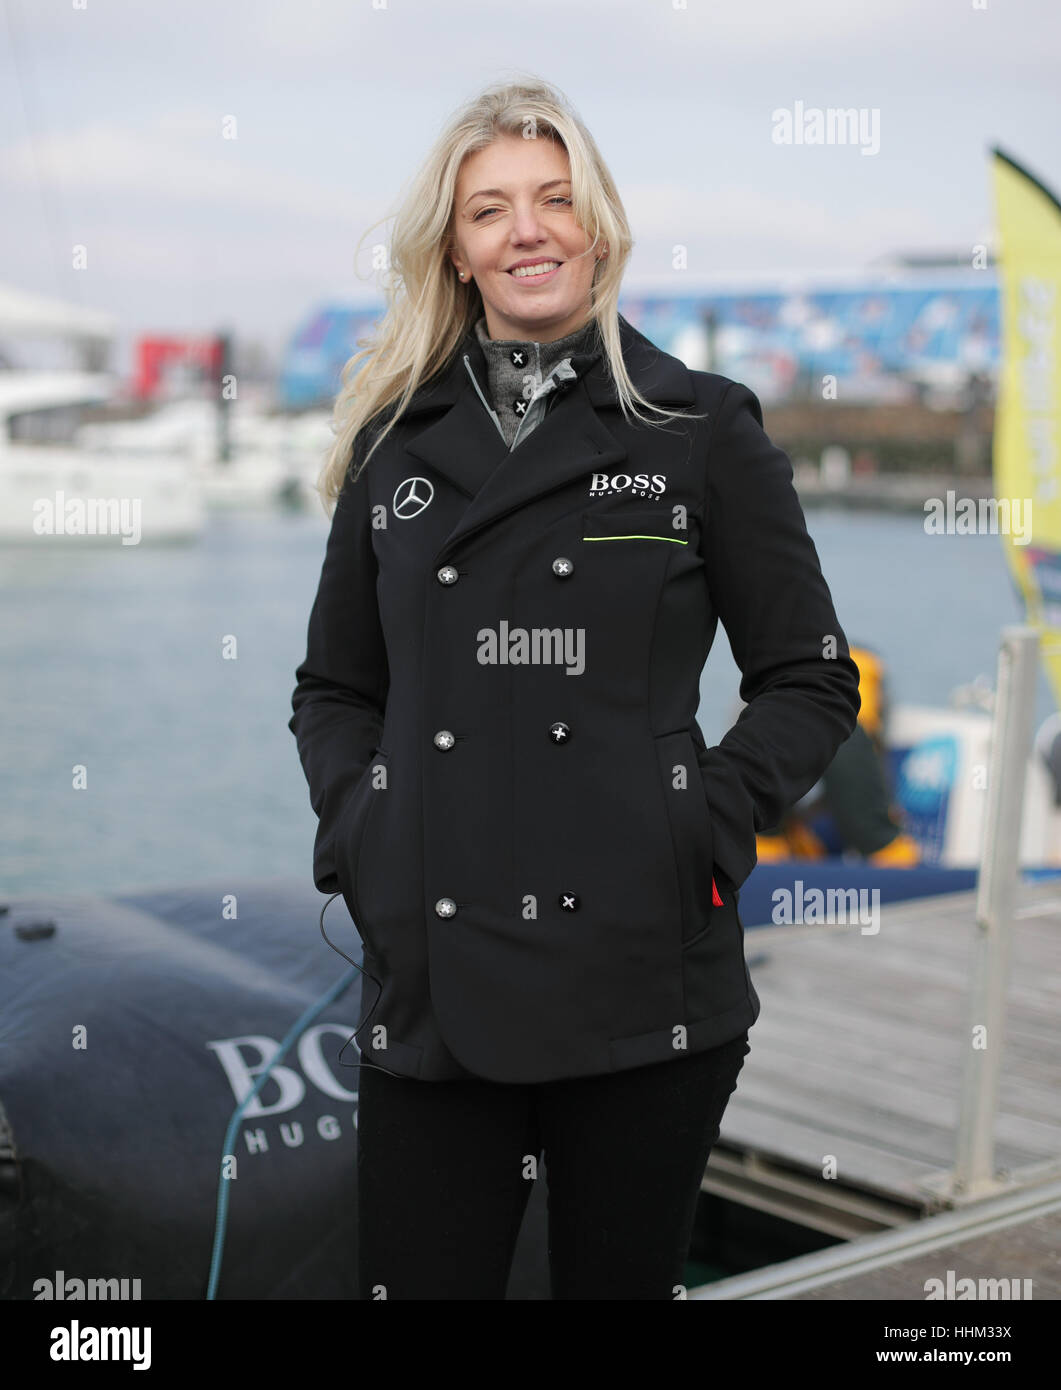 Kate Thomson, wife of British sailor Alex Thomson, during media interviews at Les Sables d'Olonne, western France, as she awaits her husband's finish in the Vendee Globe race. Stock Photo